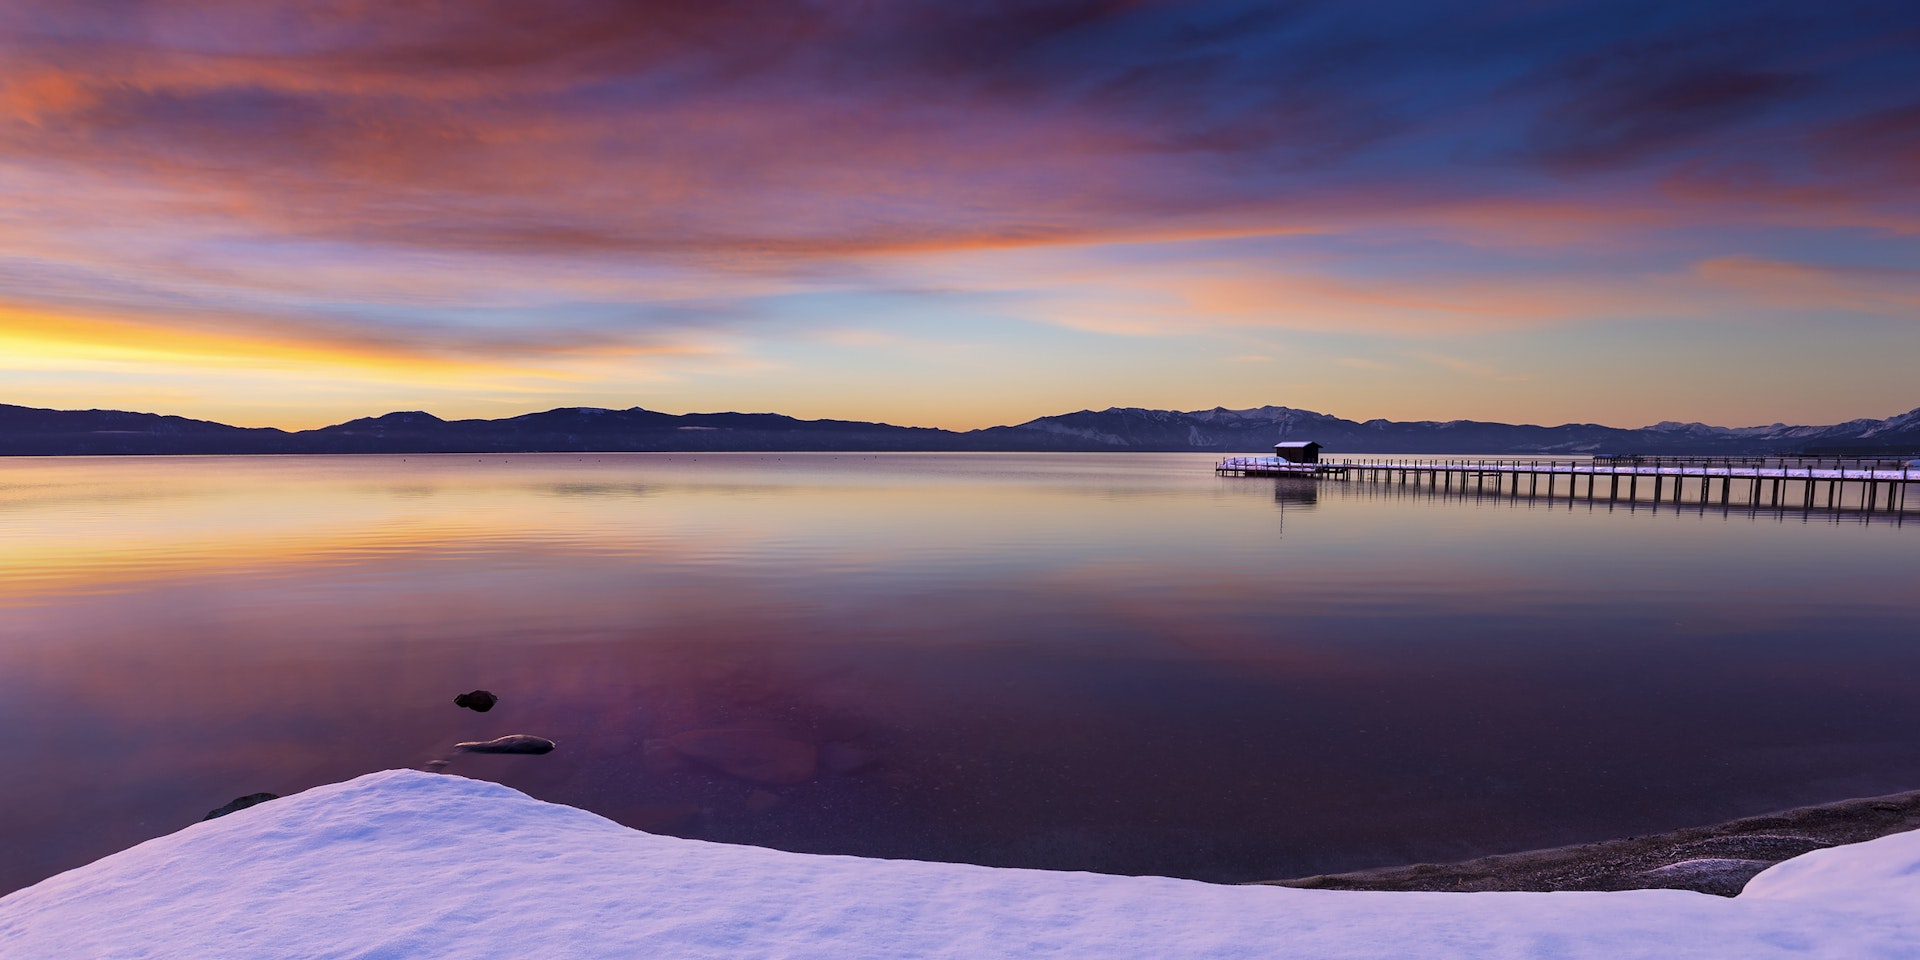 Early morning winter sunrise at Commons Beach in Tahoe City, California, Lake Tahoe.